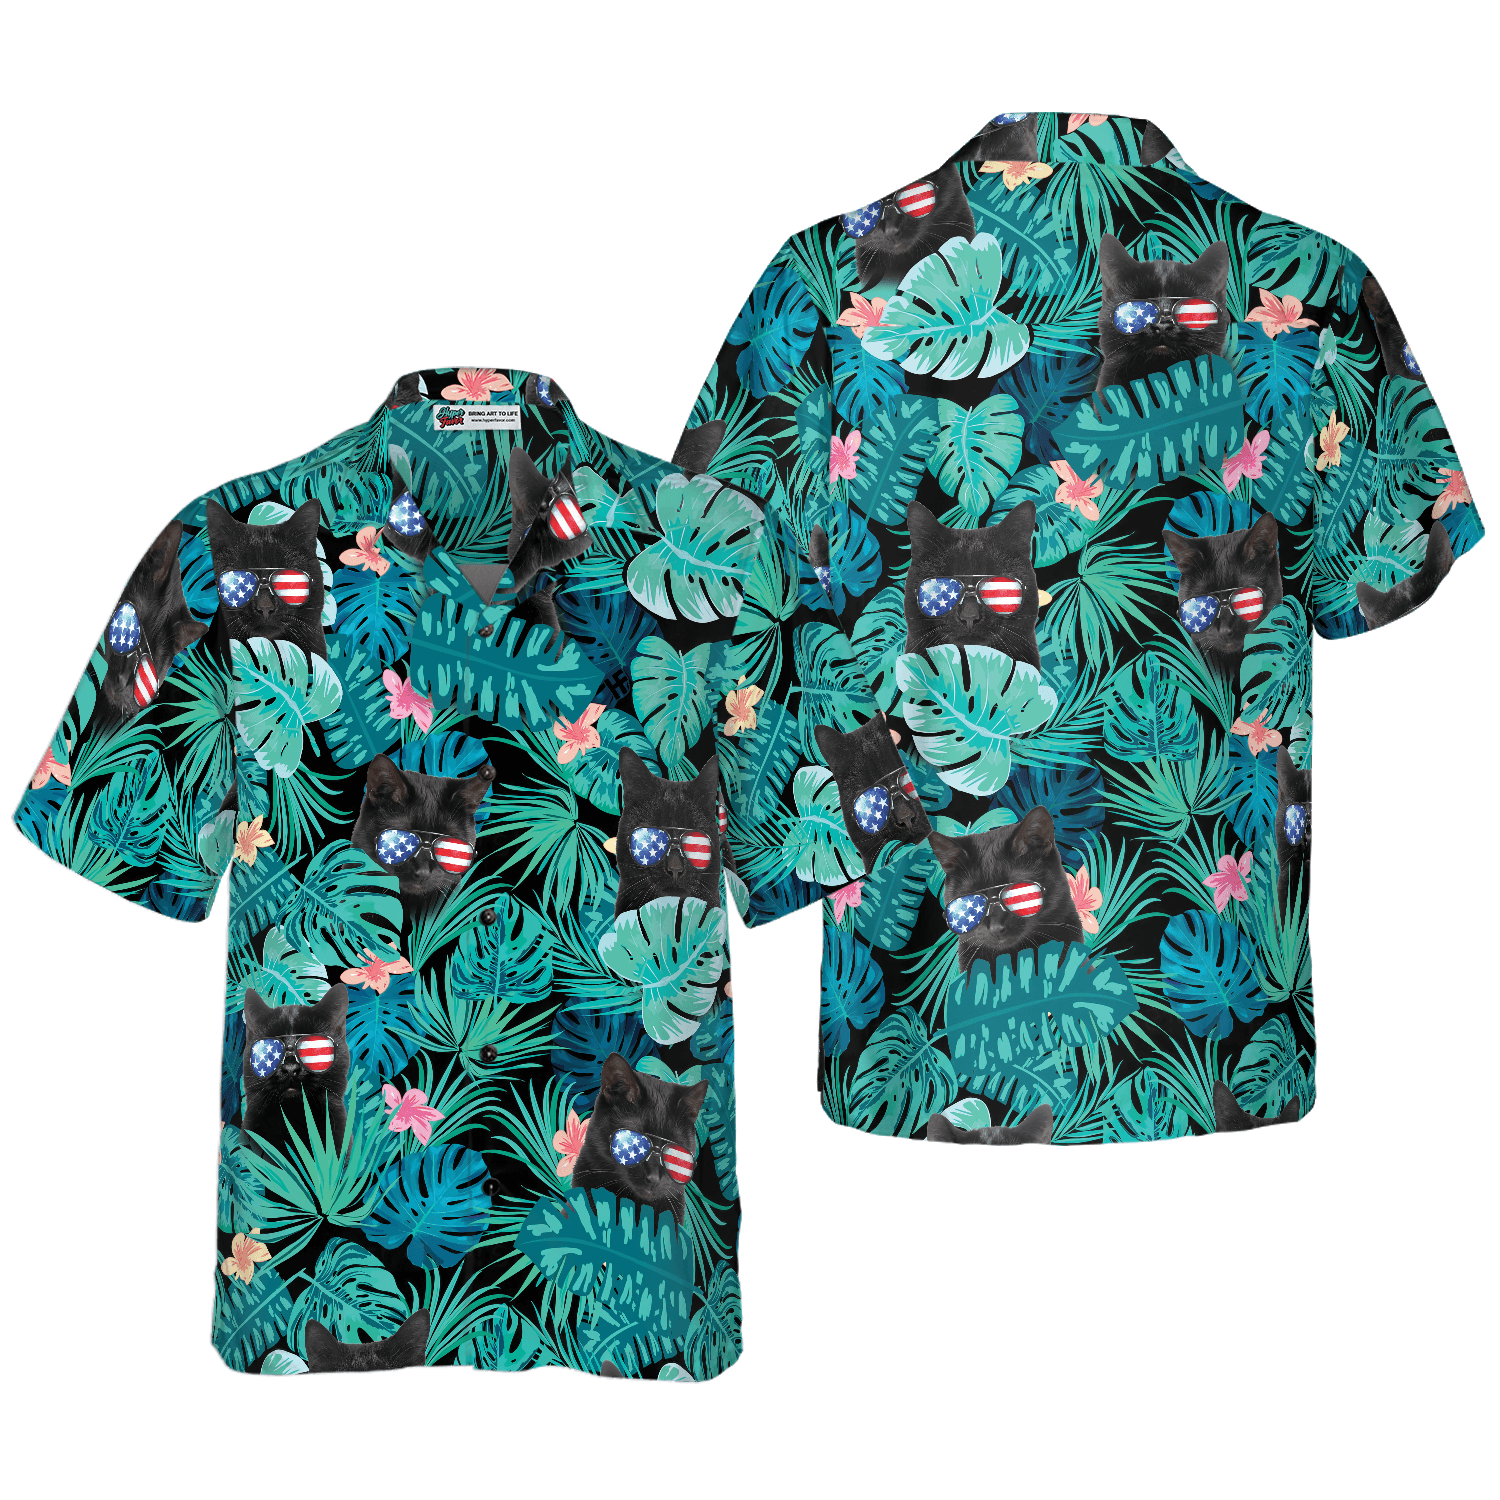 Black Cat Hawaiian Shirt For Summer, Tropical Fourth Of July, Colorful Shirt For Men Women, Perfect Gift For Friend, Team, Family, Cat Lovers - Amzanimalsgift